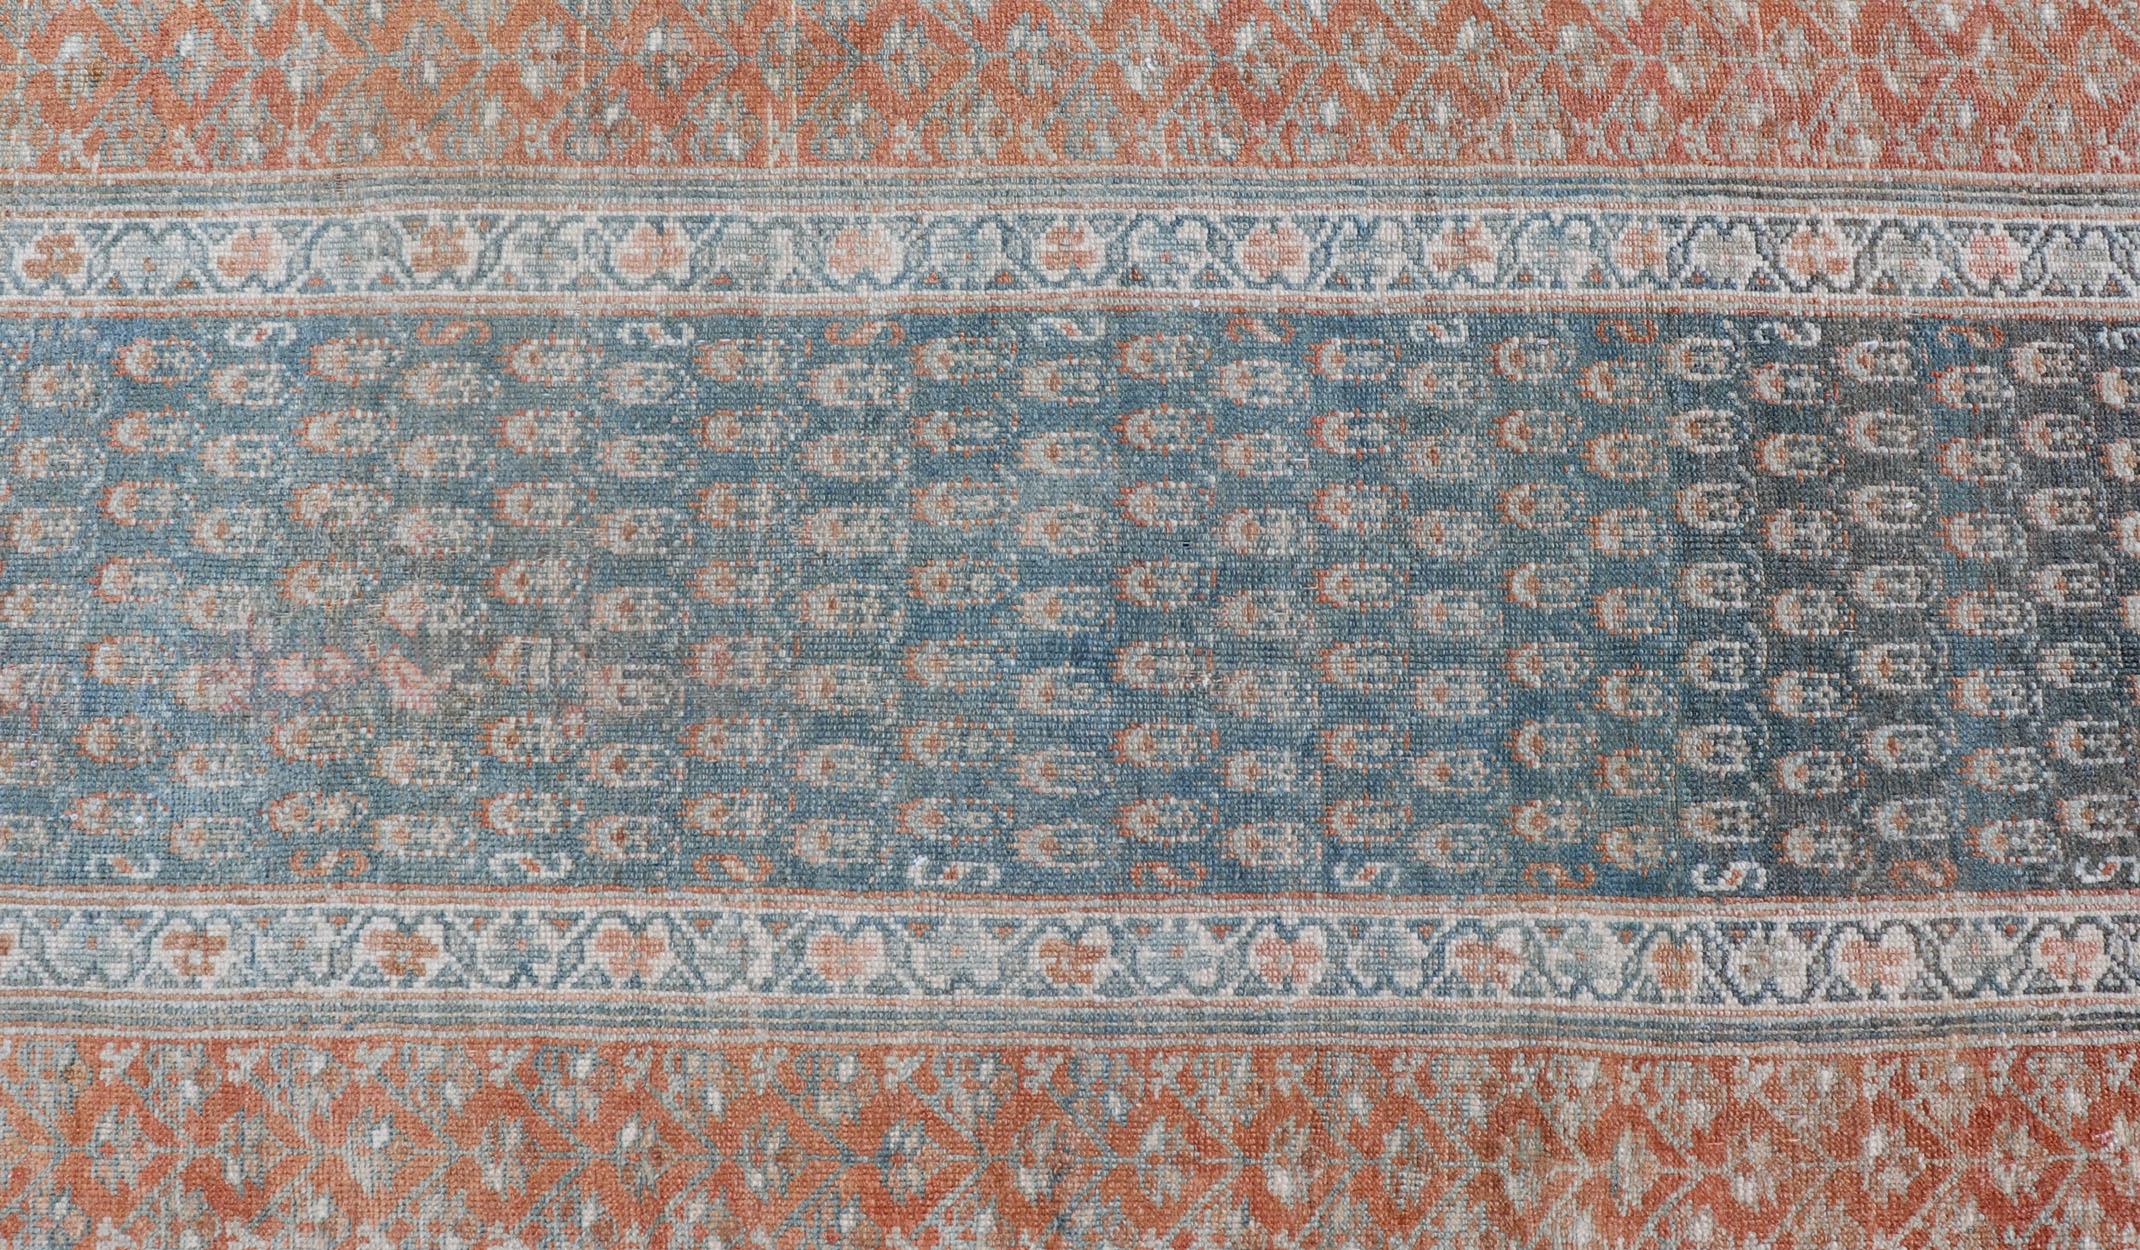 Malayer Paisley Field Antique Persian Kurdish Runner in Soft Teal Colors & Orange For Sale